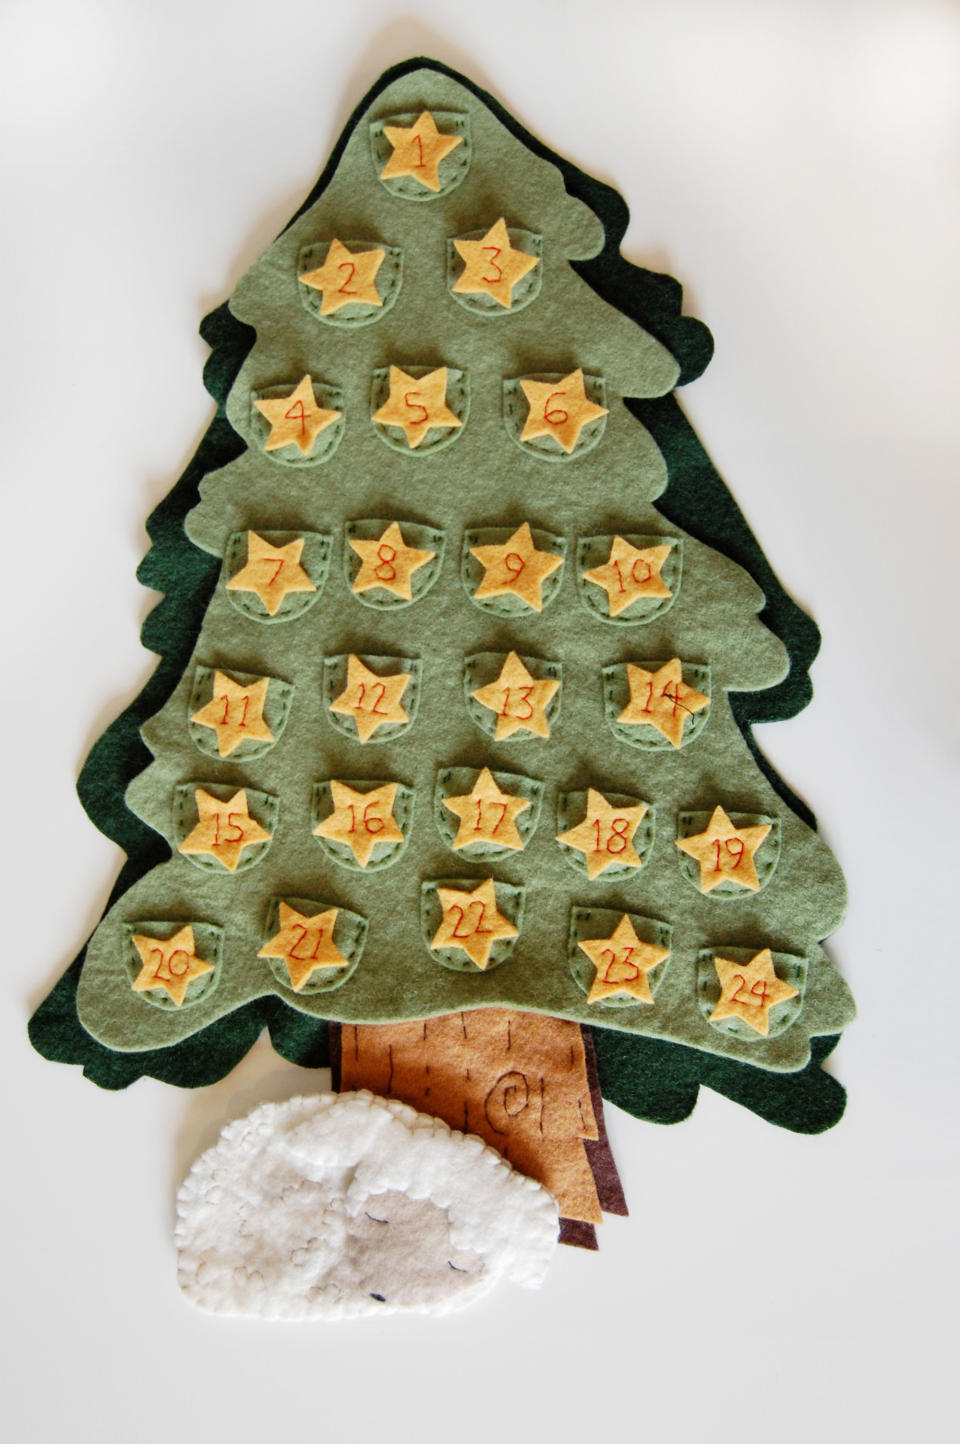 In this undated publicity photo provided by Creativebug, a traditional tree theme advent calendar that is useful for both children and adults is shown. You can learn how to make one at Creativebug, an online crafts class site. (AP Photo/Creativebug, Jeanne Lewis)